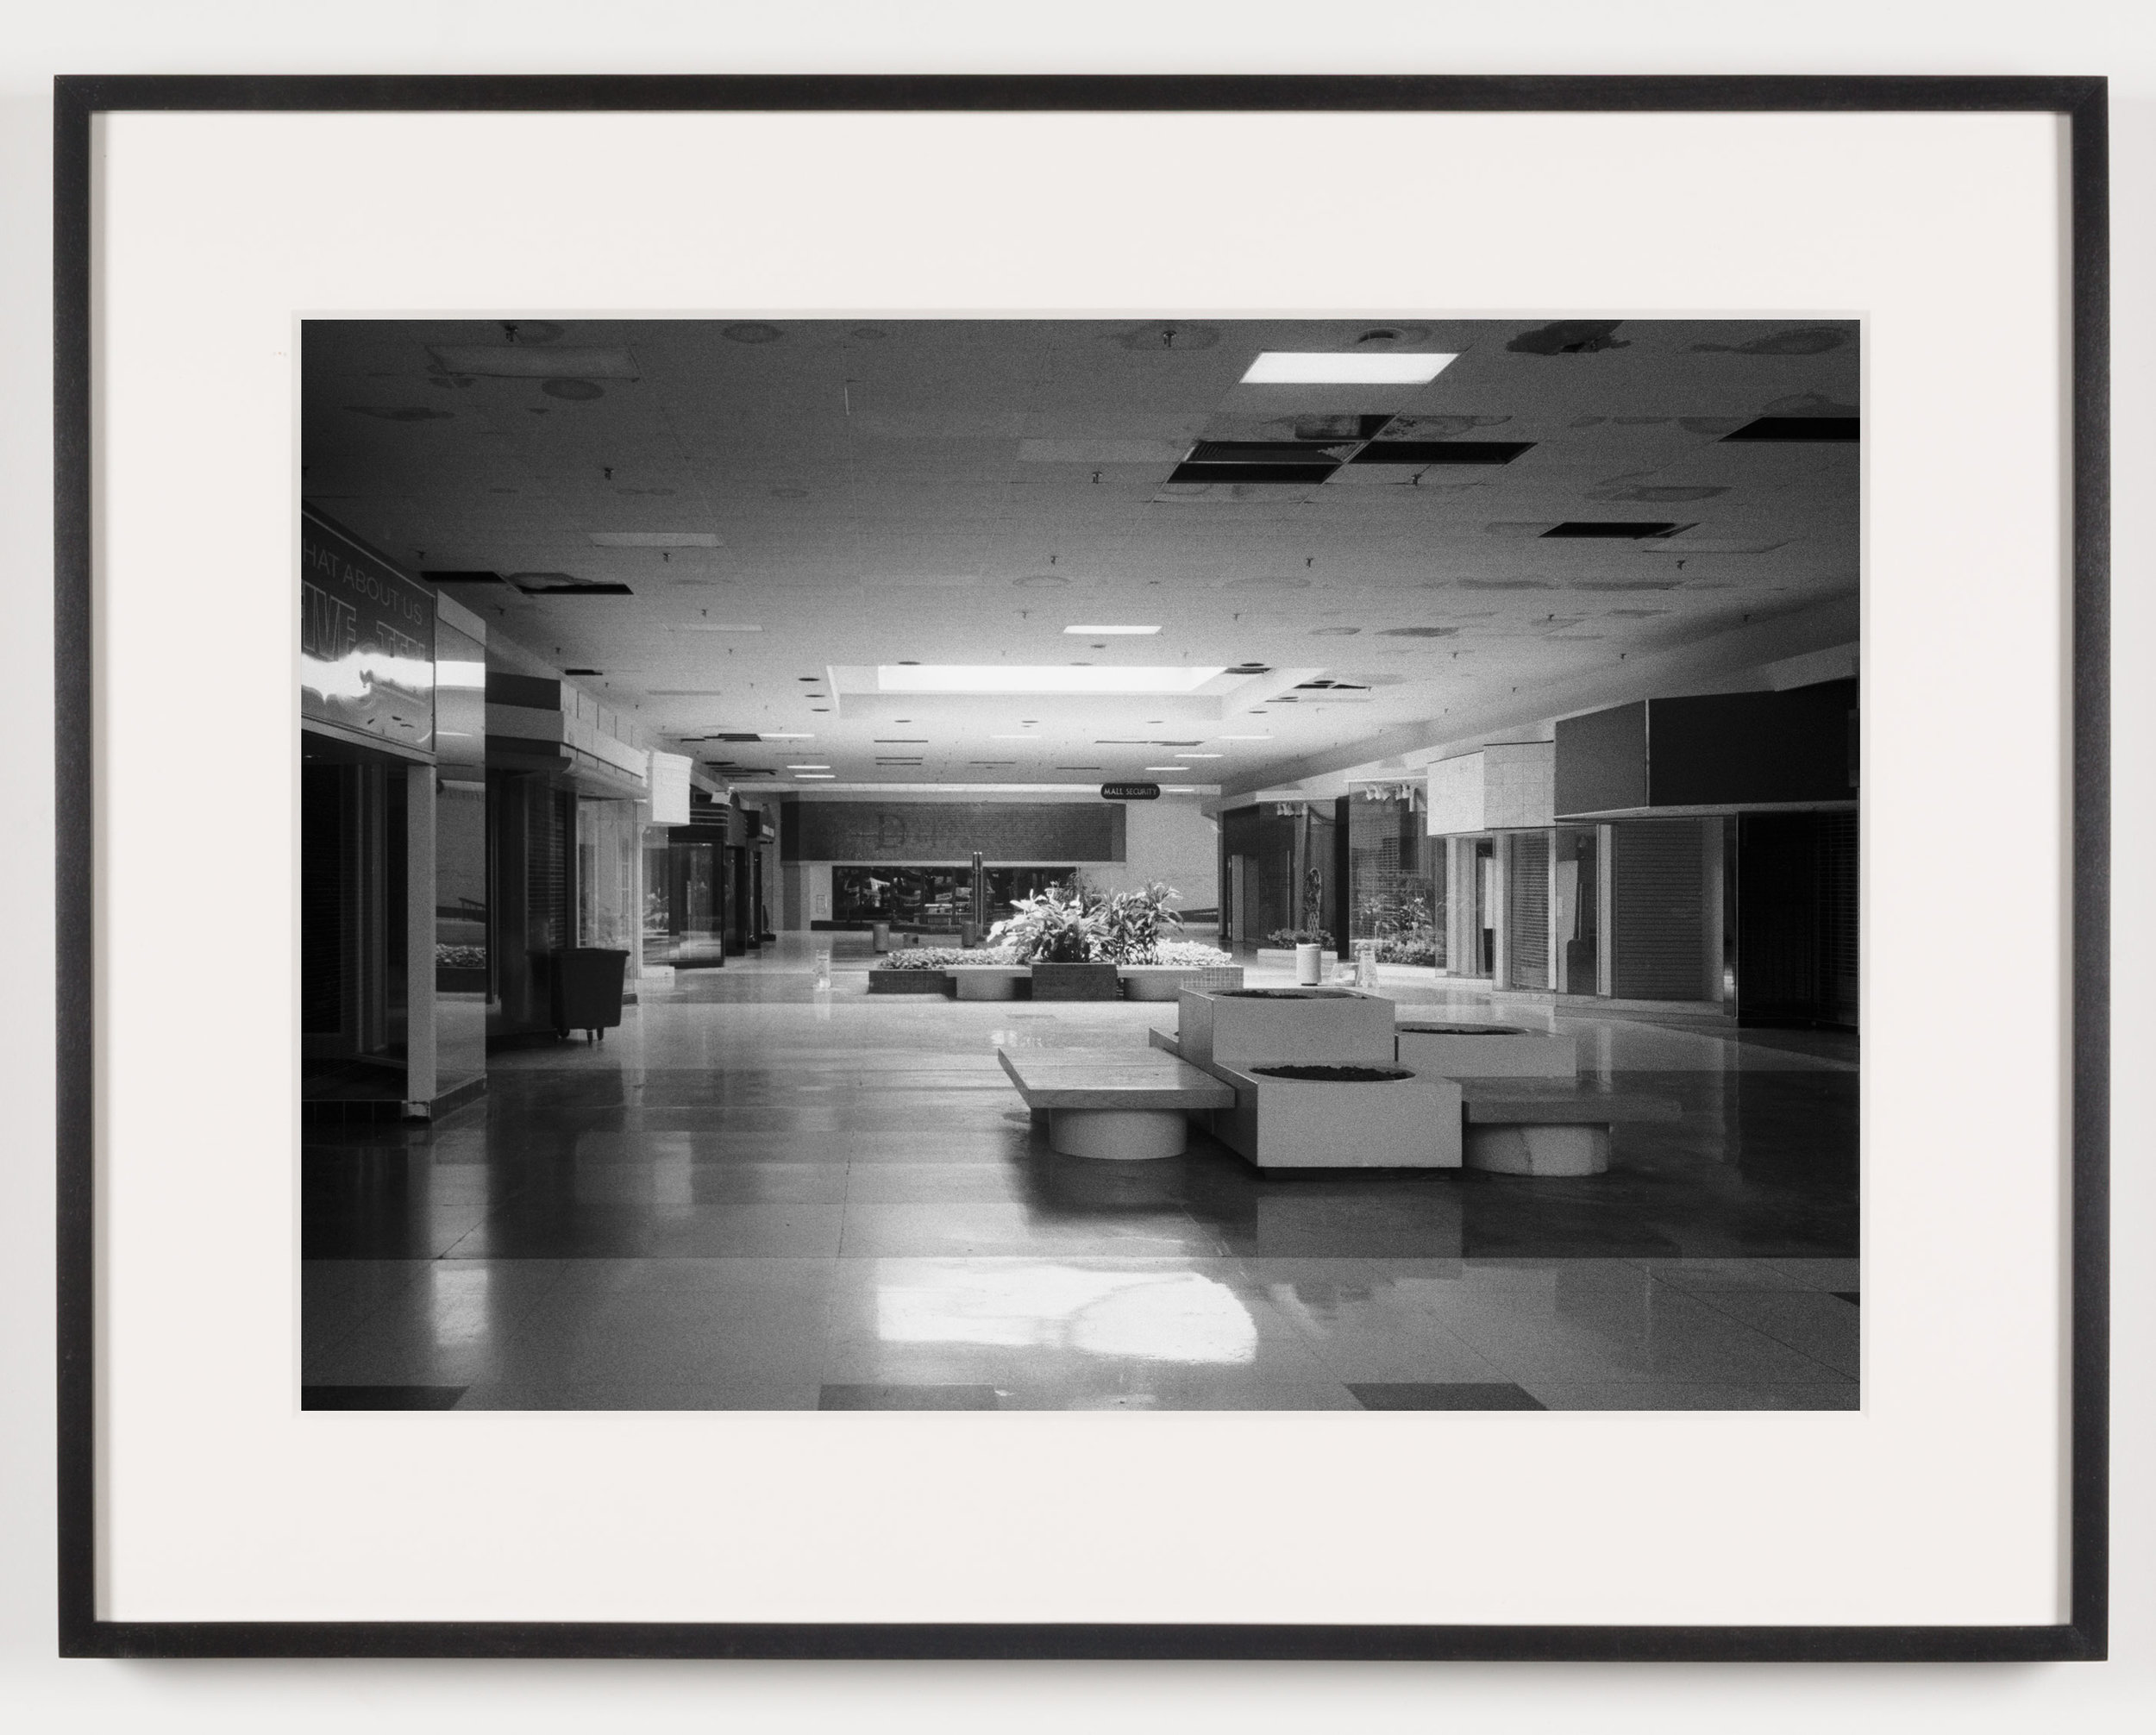   Rolling Acres Mall ('Dillards') Akron, OH, Est. 1975   2011  Epson Ultrachrome K3 archival ink jet print on Hahnemühle Photo Rag paper  21 5/8 x 28 1/8 inches   American Passages, 2001–2011    A Diagram of Forces, 2011     